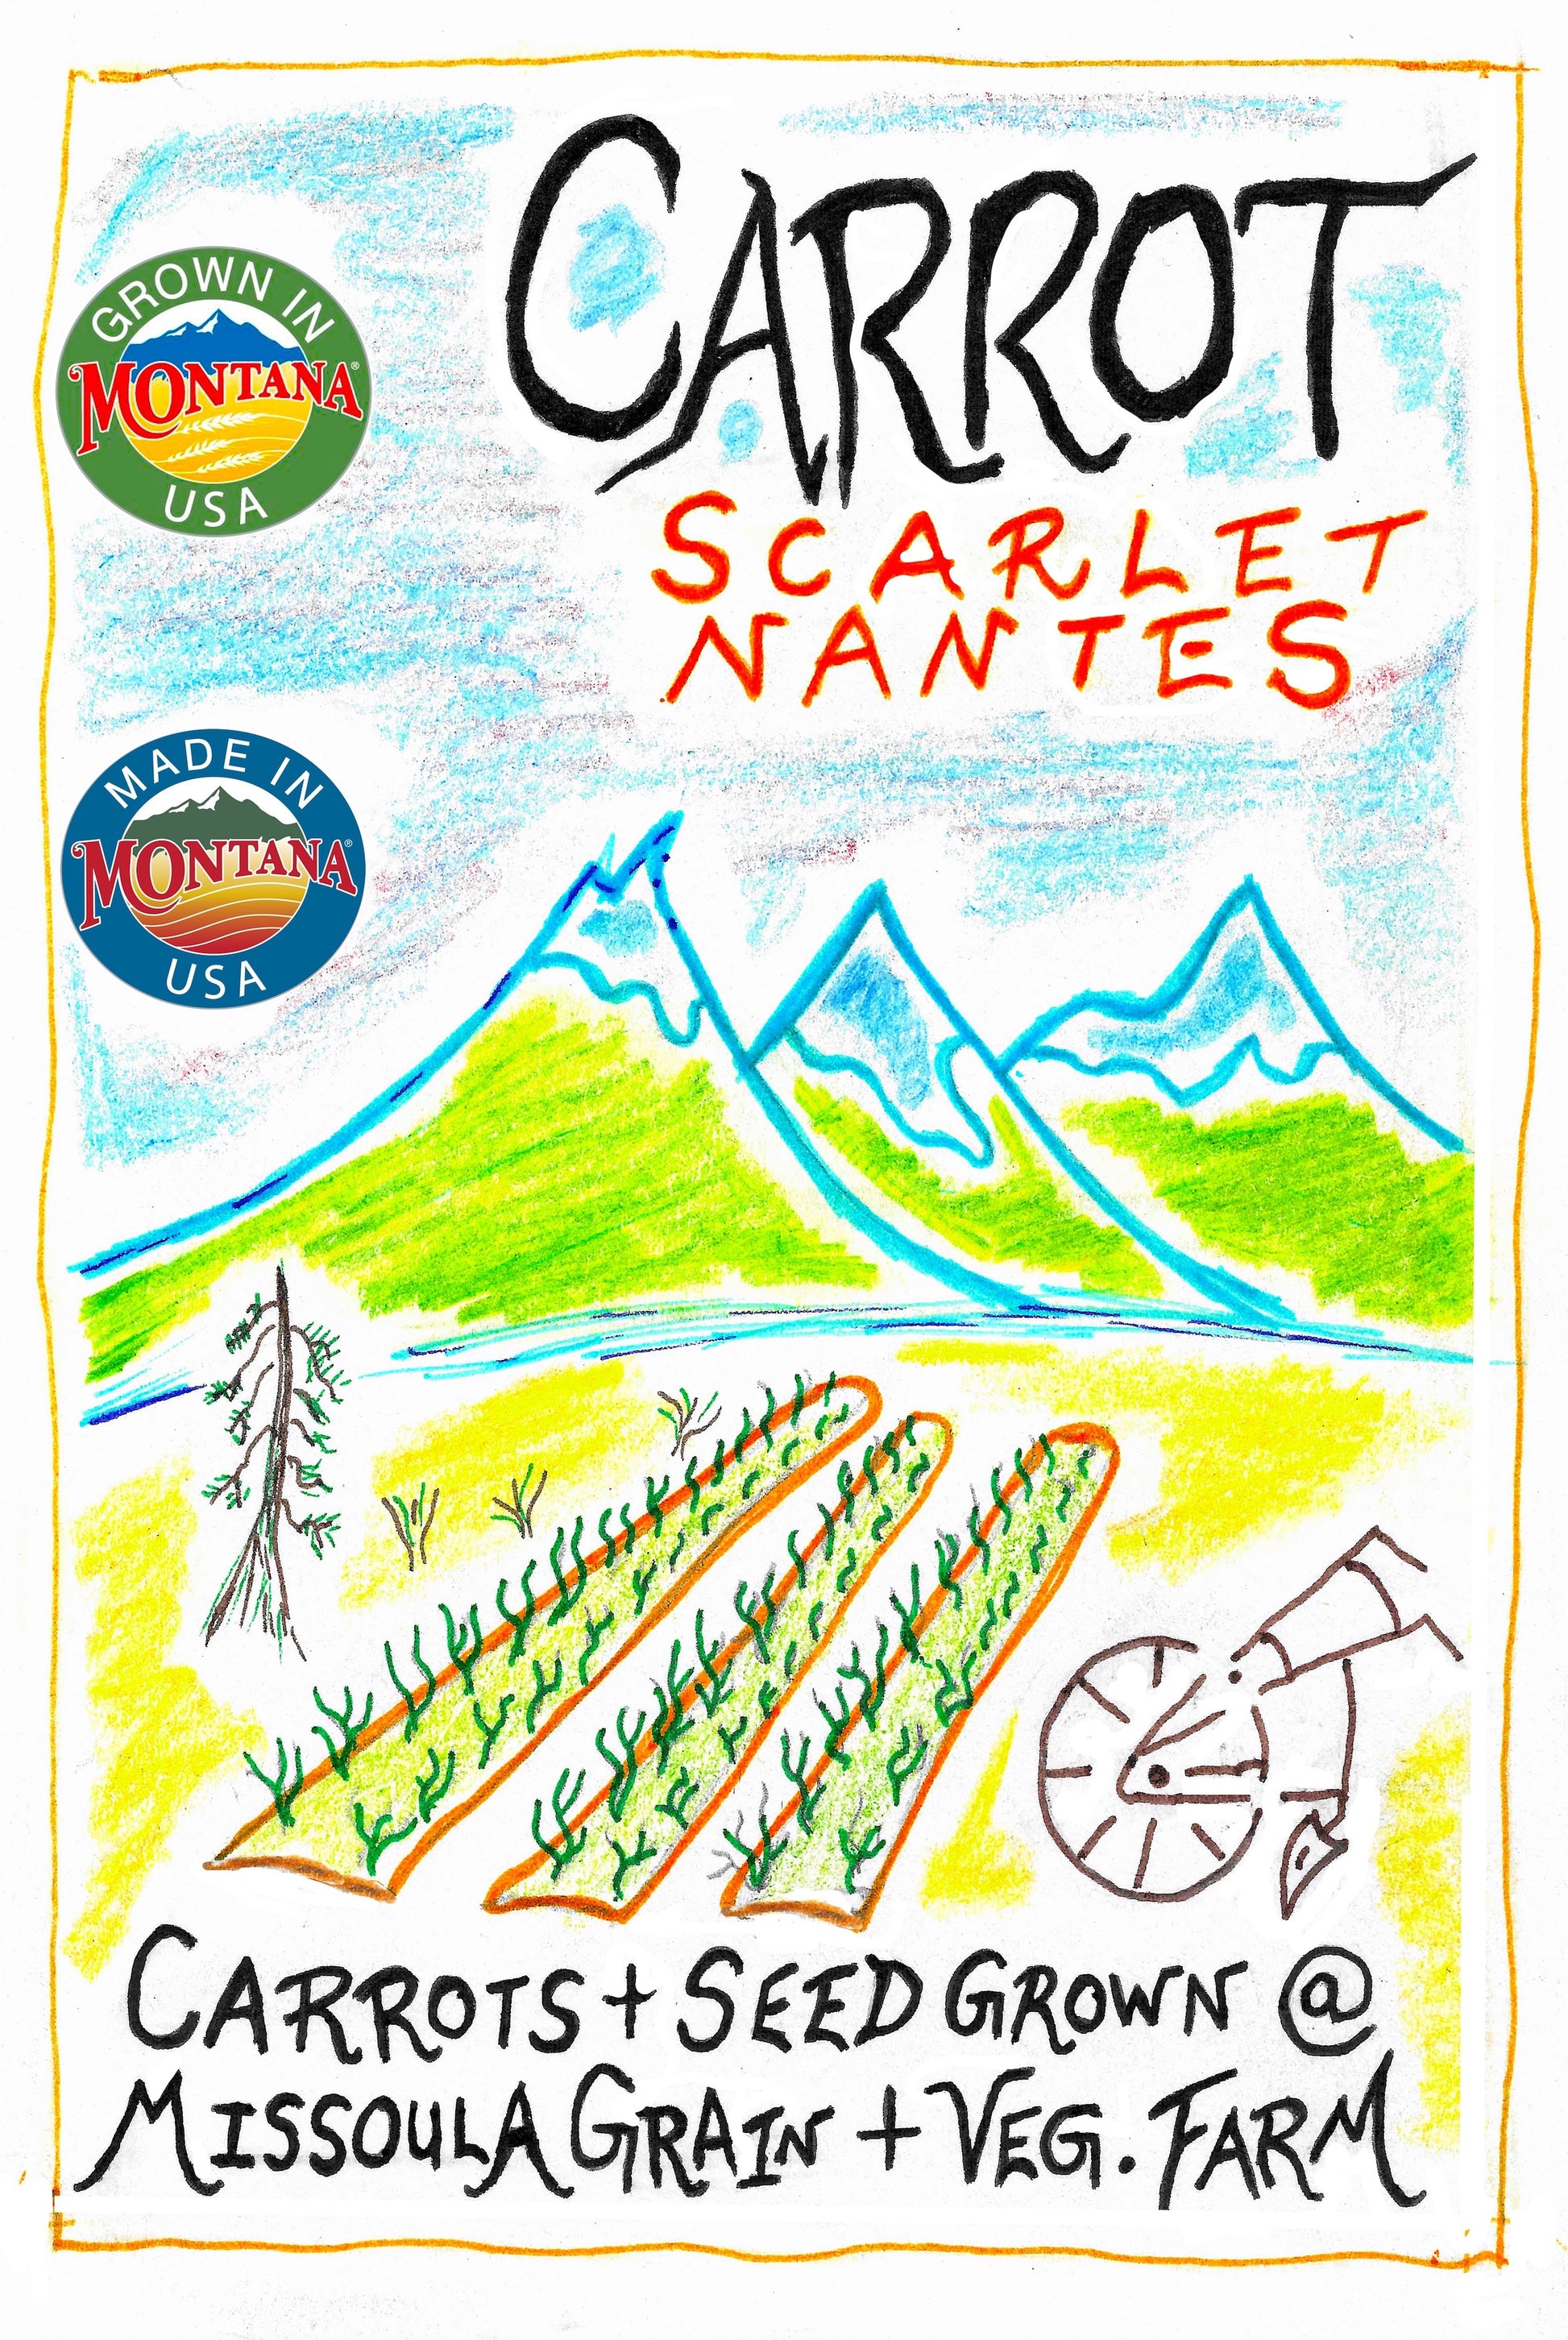 scarlet nantes grown with no chemicals missoula grain and vegetable farm stevensville western montana made in montana grown in montana certified hand drawn art work packet local grown seed farm grown carrots farm grown seed complete the food to seed loop cycle network orange juicy crunchy storage carrot carrots